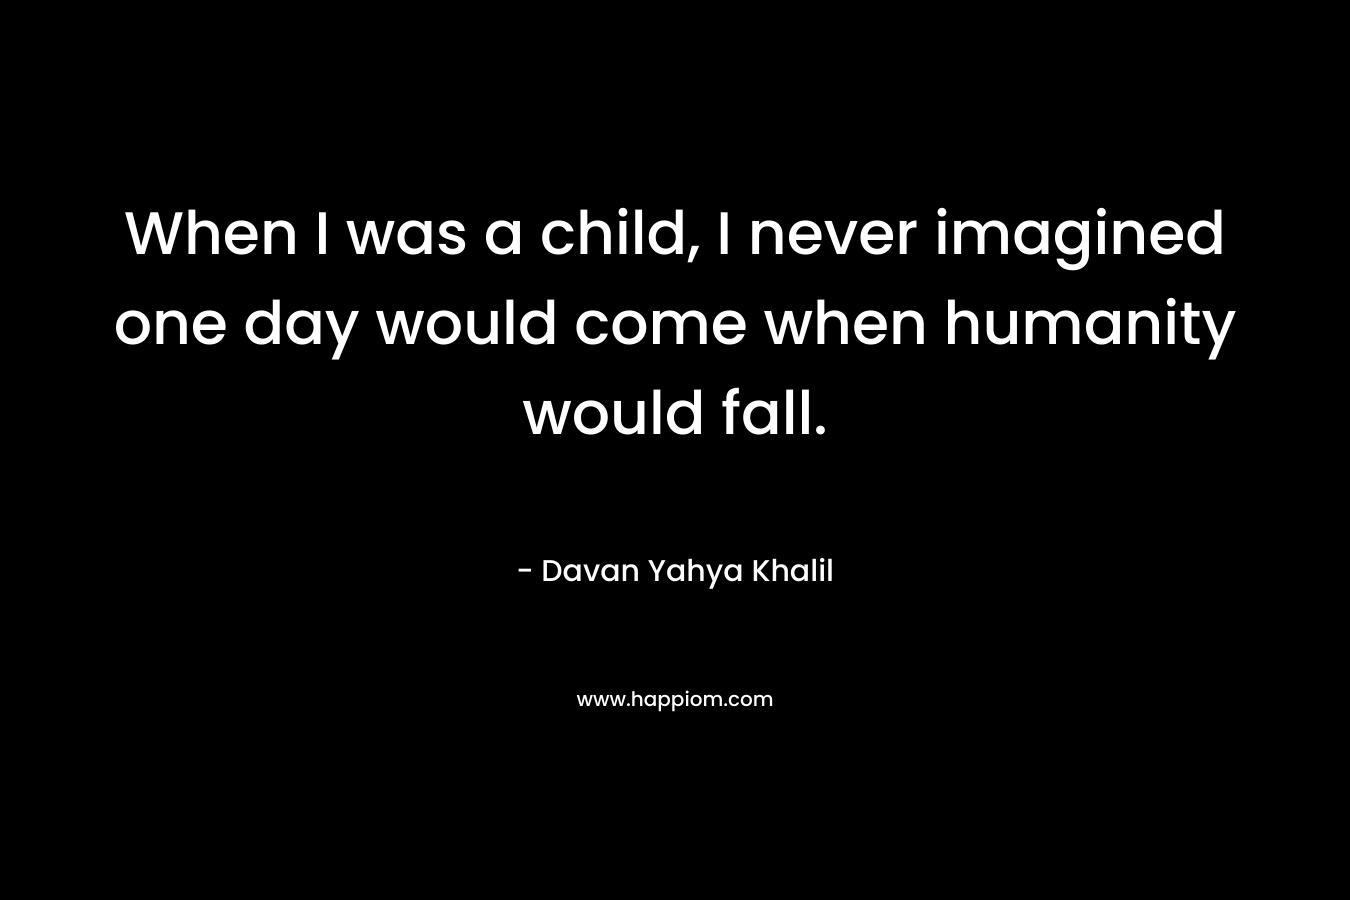 When I was a child, I never imagined one day would come when humanity would fall. – Davan Yahya Khalil